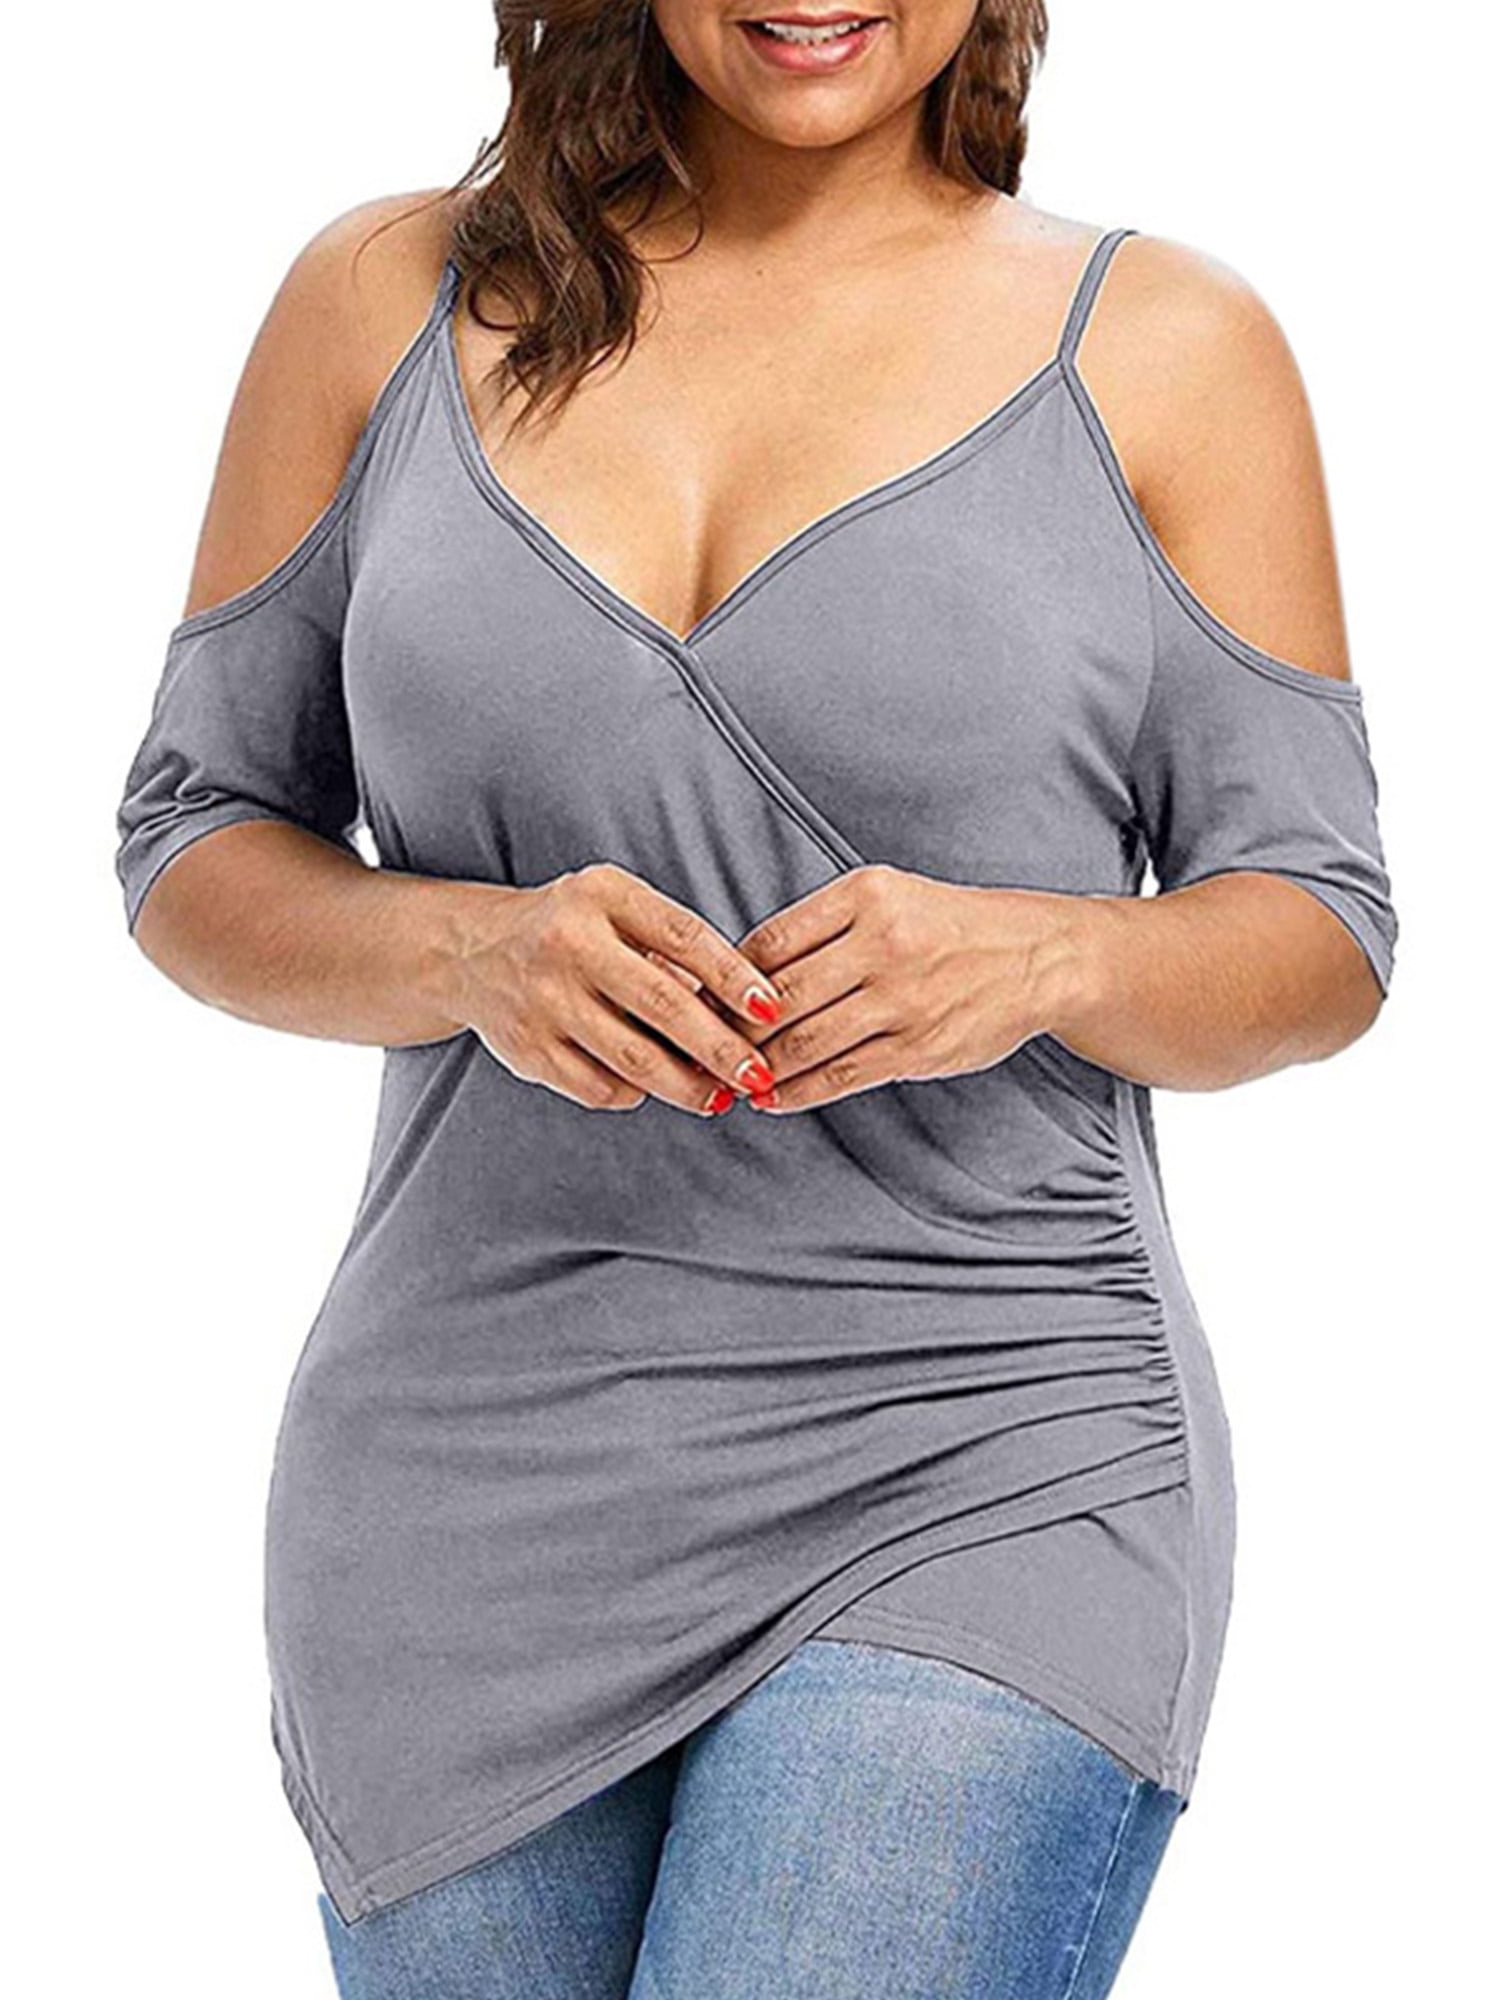 Plus Size Womens Summer Cold Shoulder Top T Shirt Ladies Casual Loose Tee Blouse 